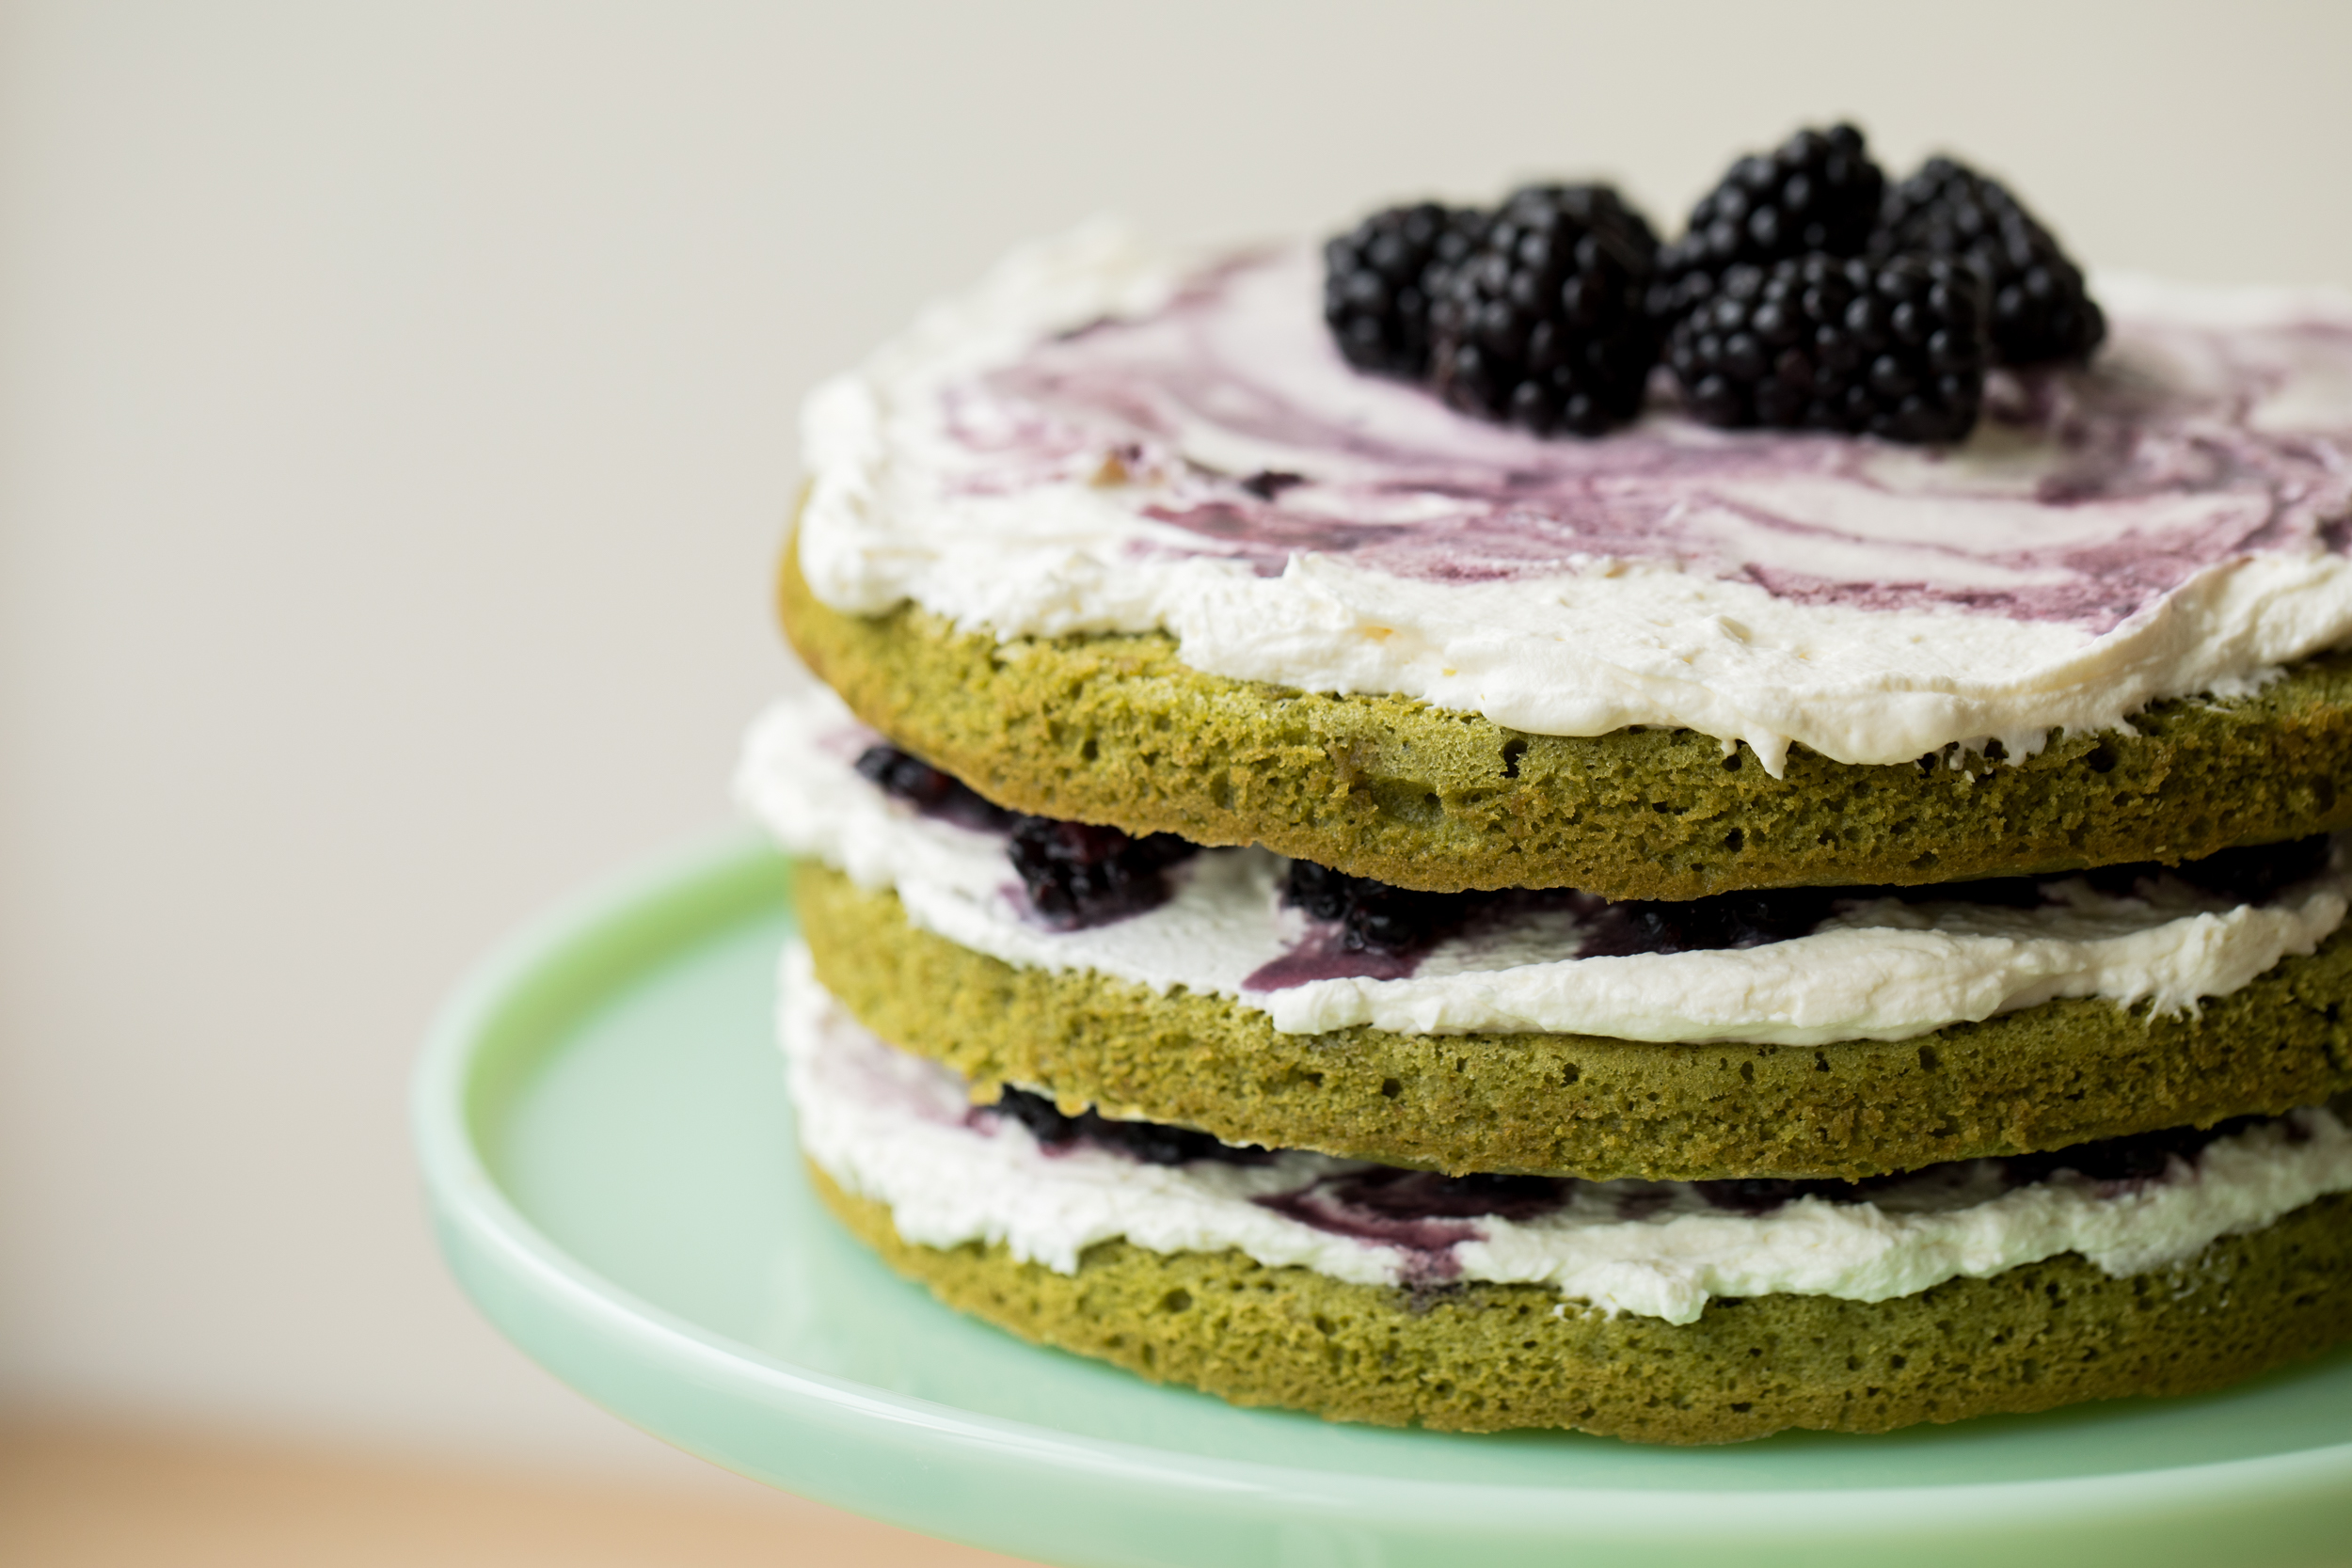 A side view of a matcha blackberry layer cake: the four green layers are sandwiched with whipped cream and mashed blackberries, and the top is covered with whipped cream and whole blackberries. The cake sits on a jade cake stand.